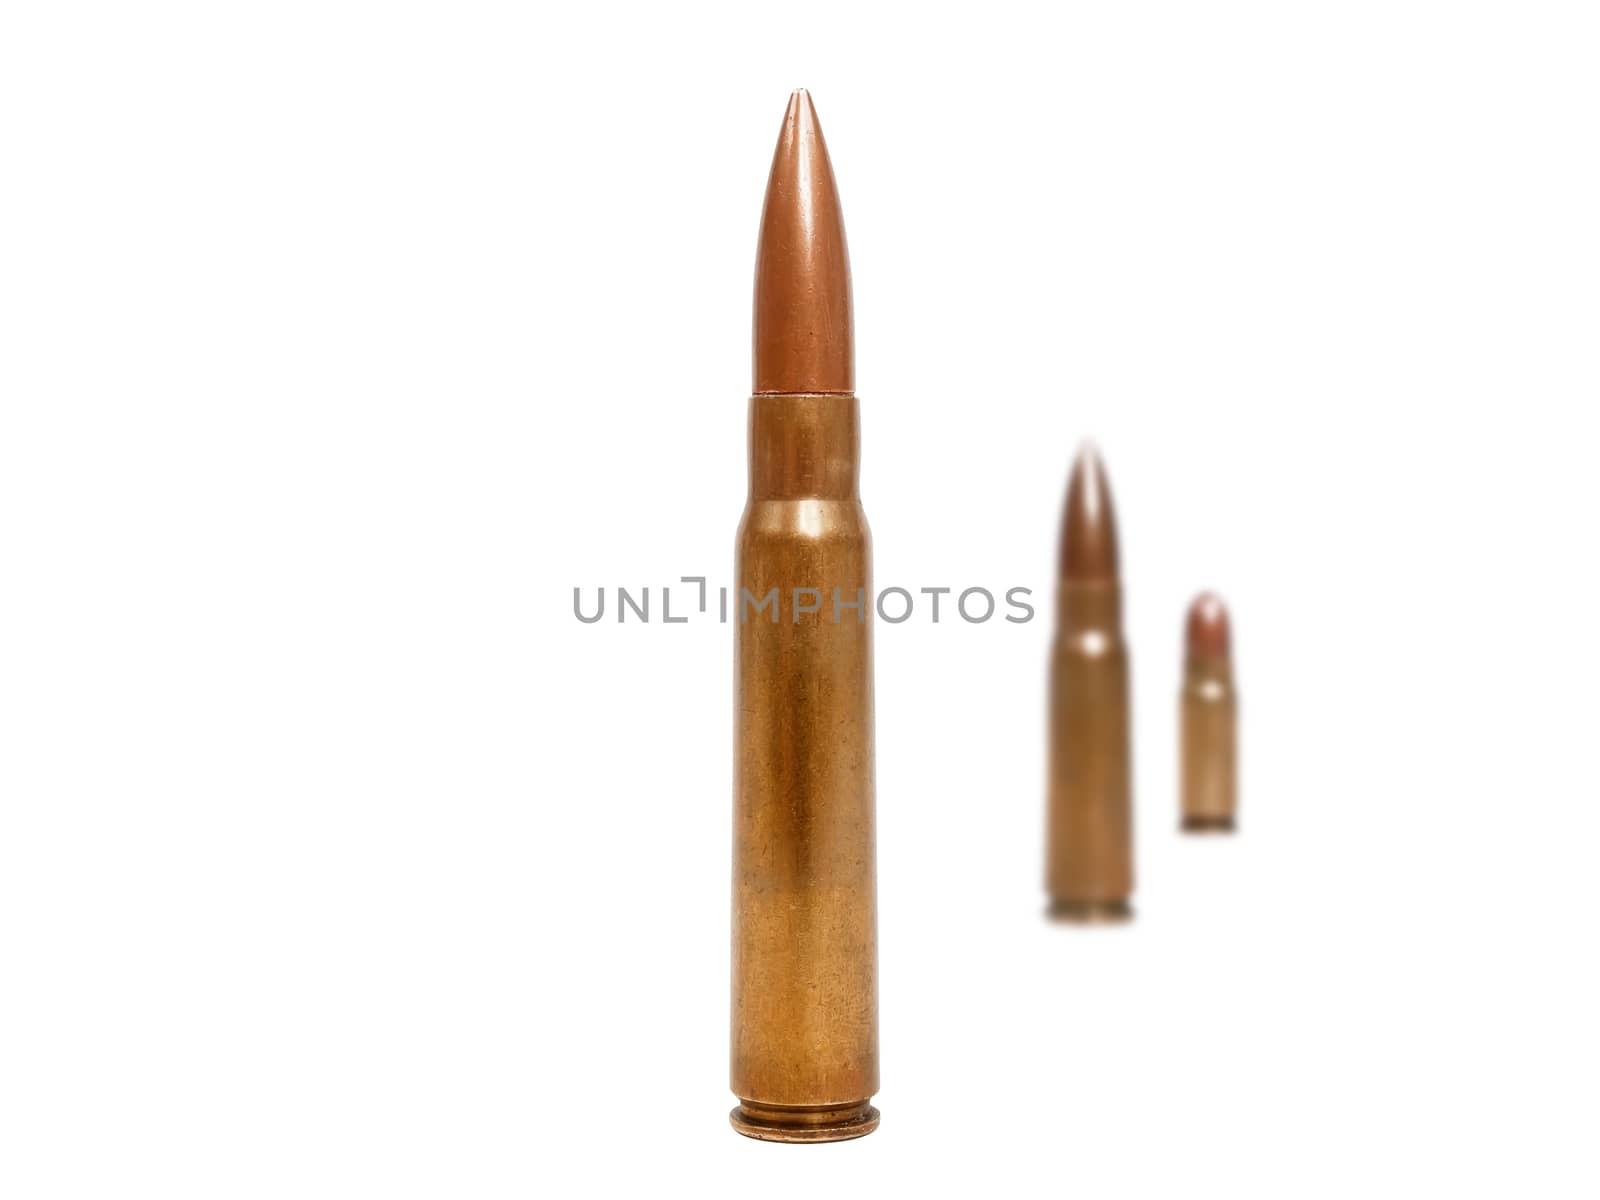 three bullets, two of them blurred deep in background